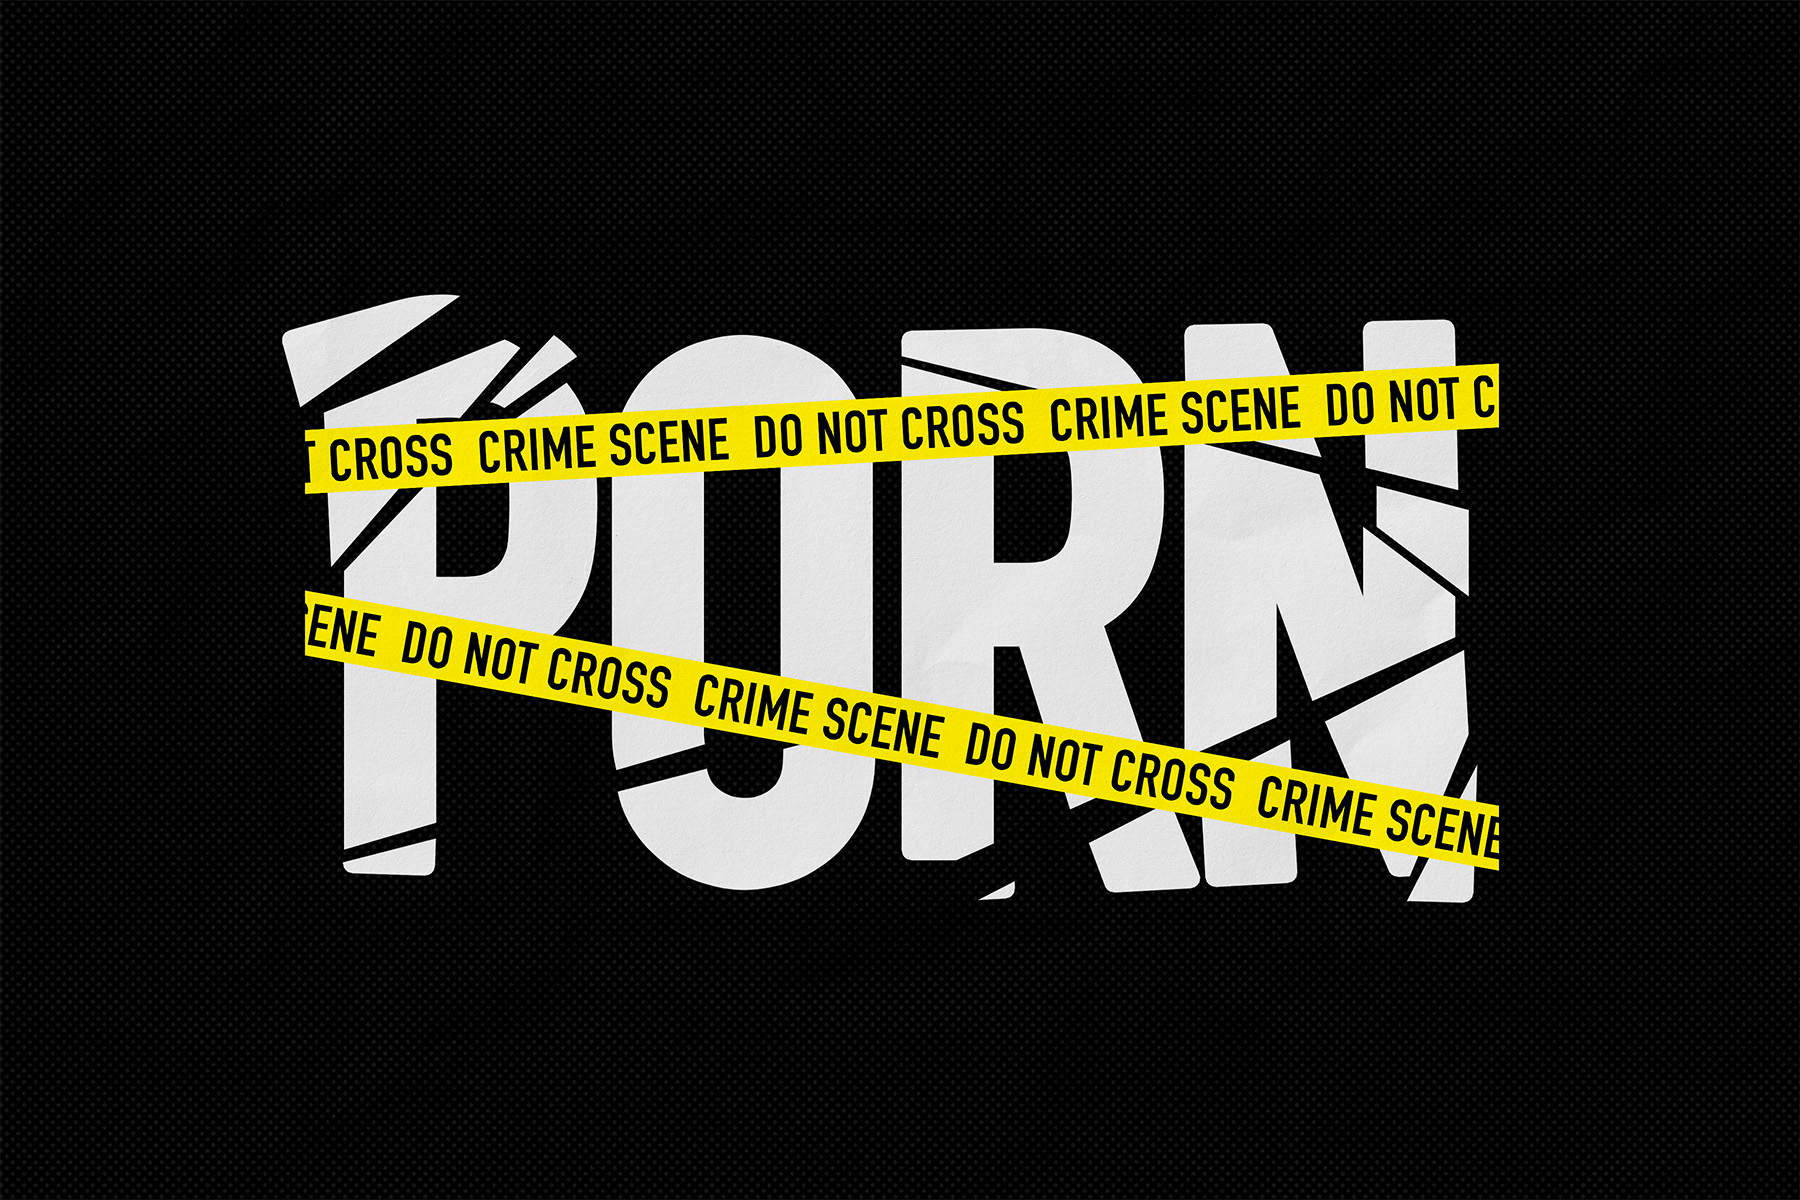 Illustration of the word "porn" being shattered and obscured by crime scene tape.